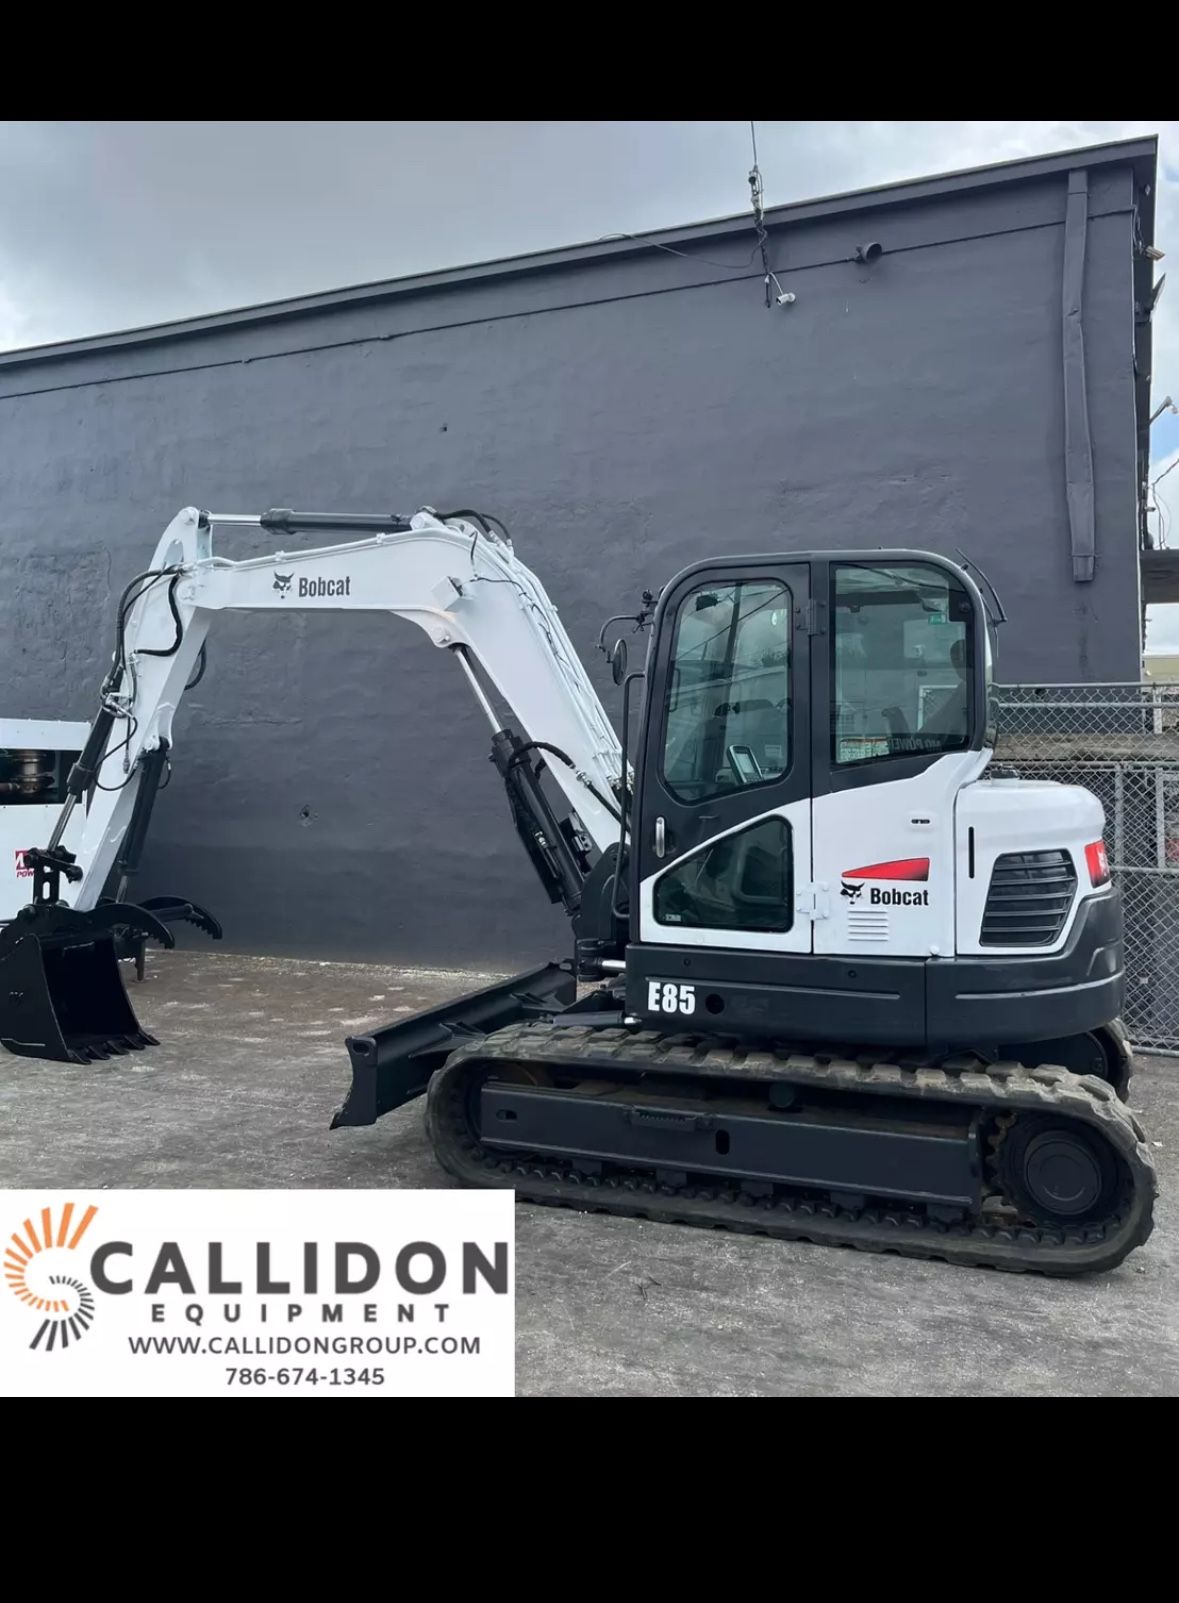 2015 Bobcat E85 Tracked Excavator Enclosed Cab A/C Heat Aux Hyd Hours: 3,300